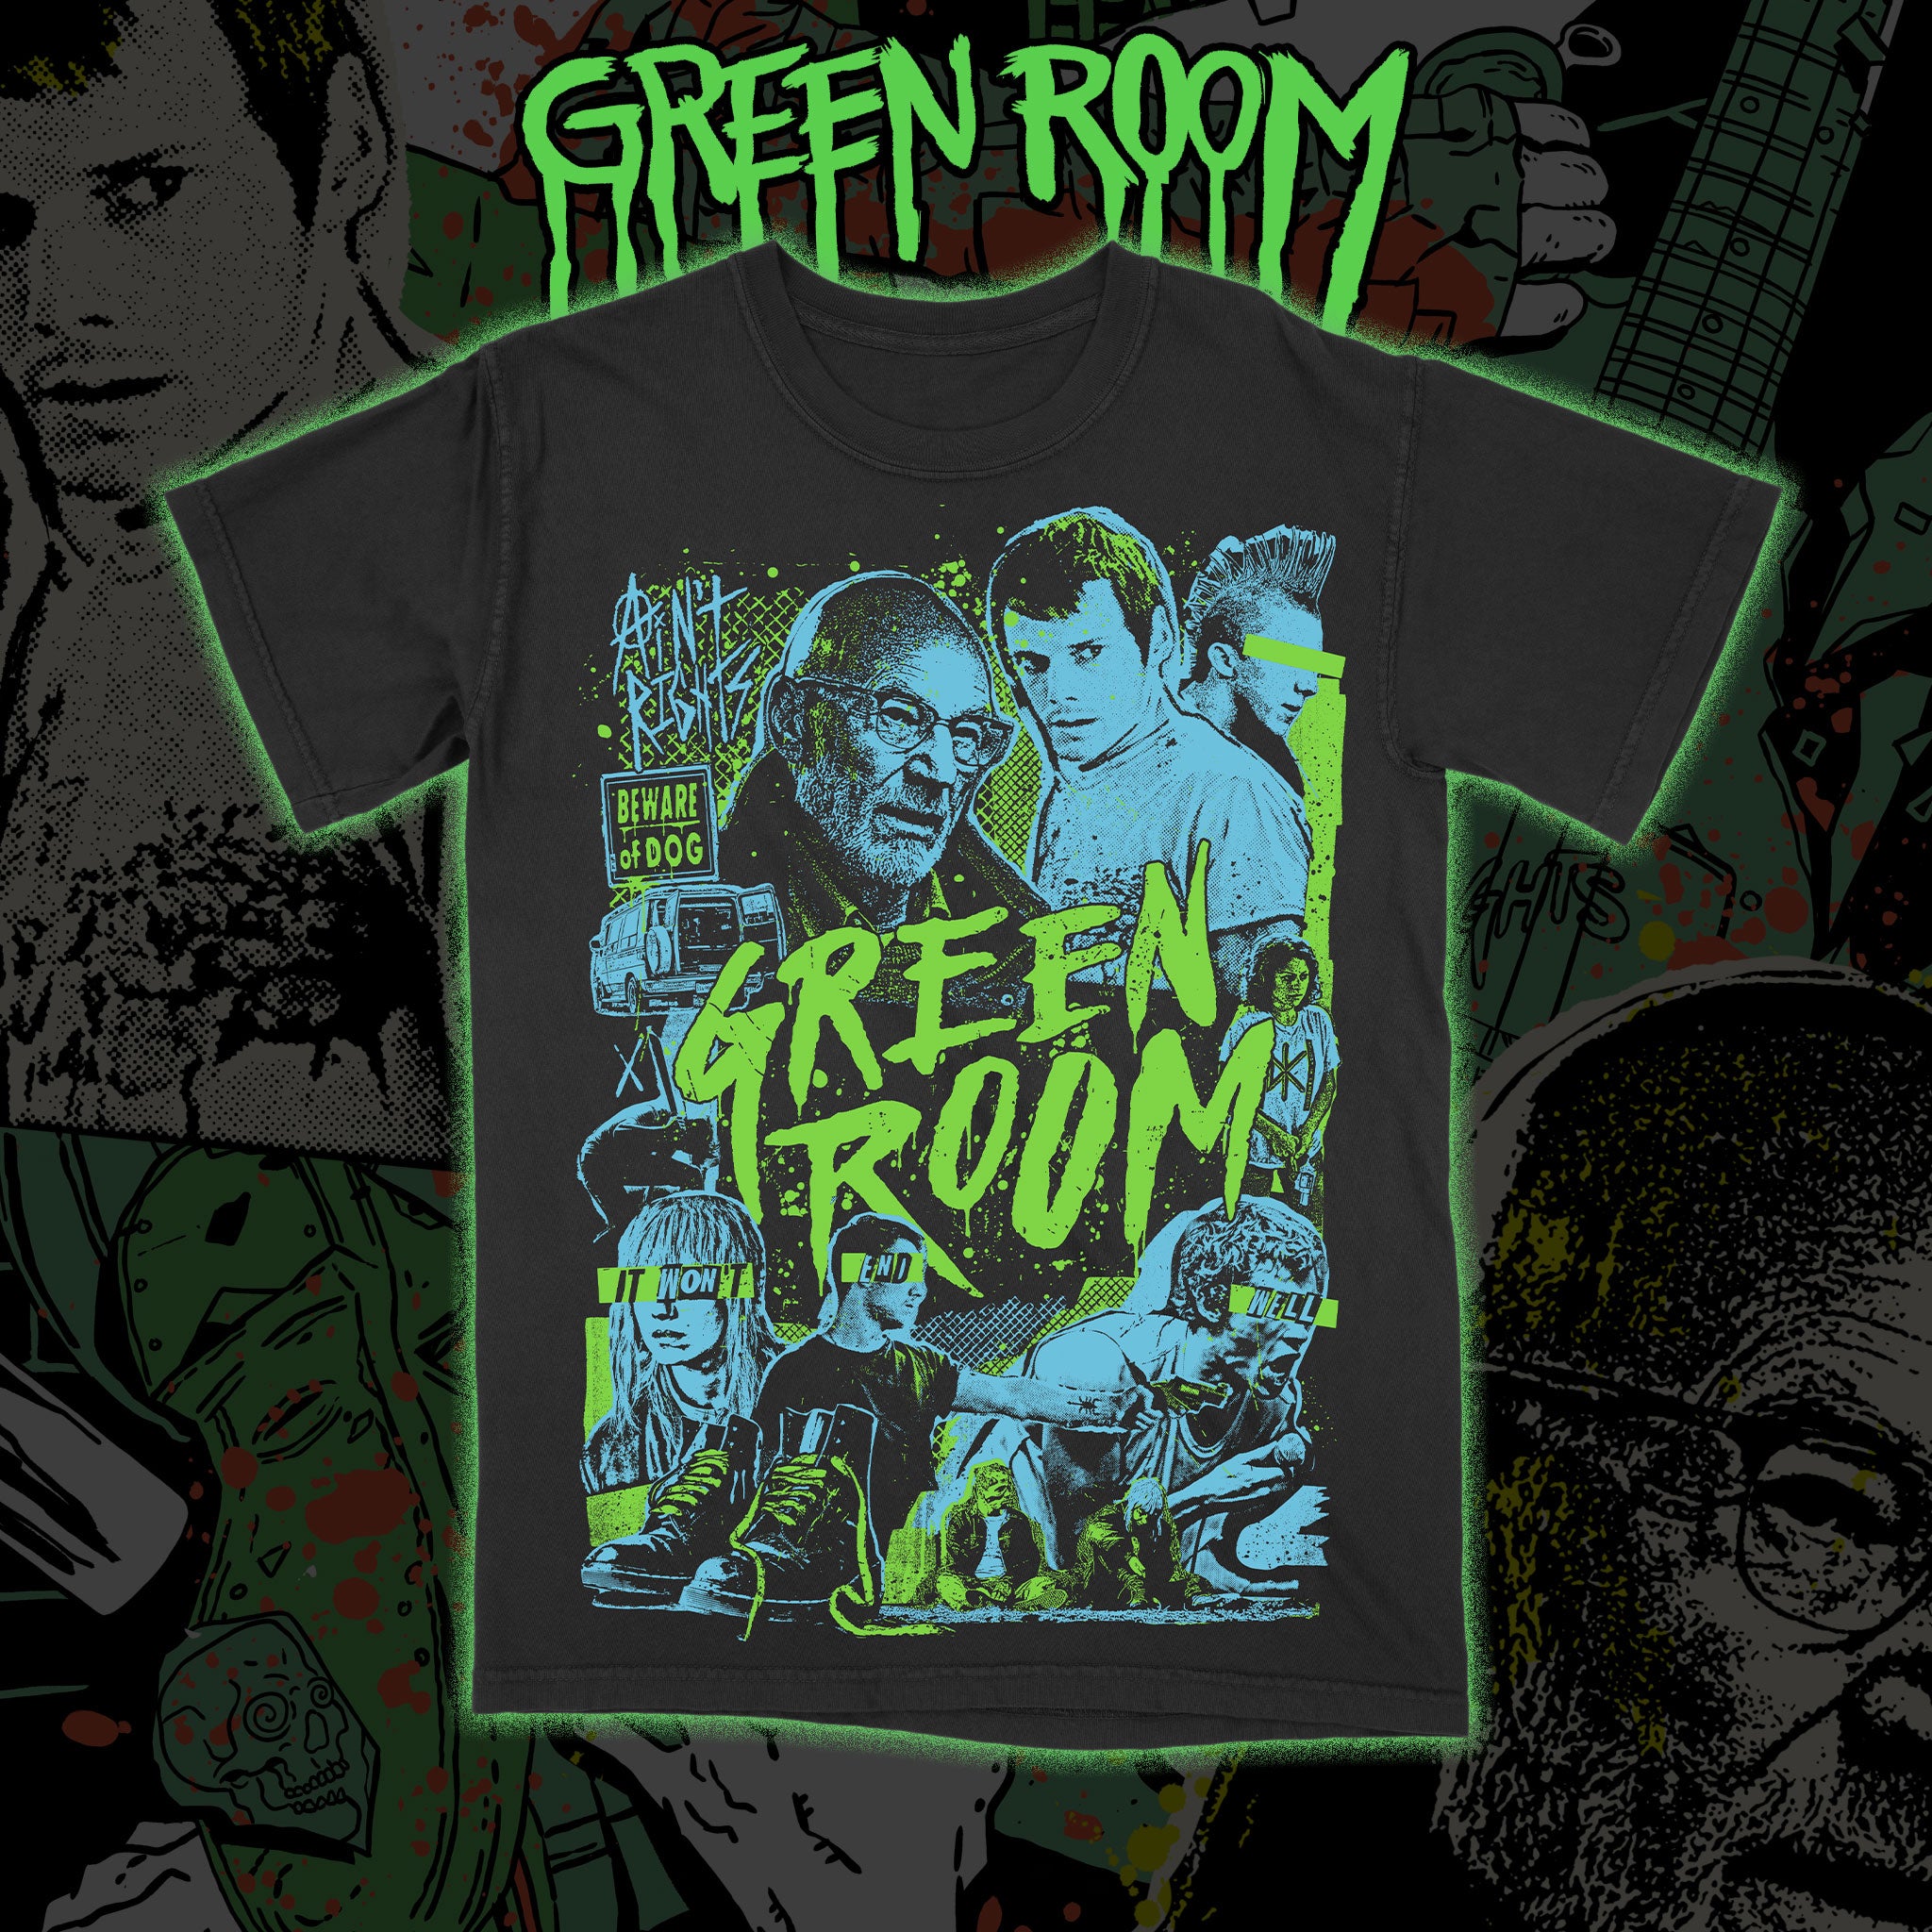 Green Room "This is a Nightmare" Premium tee